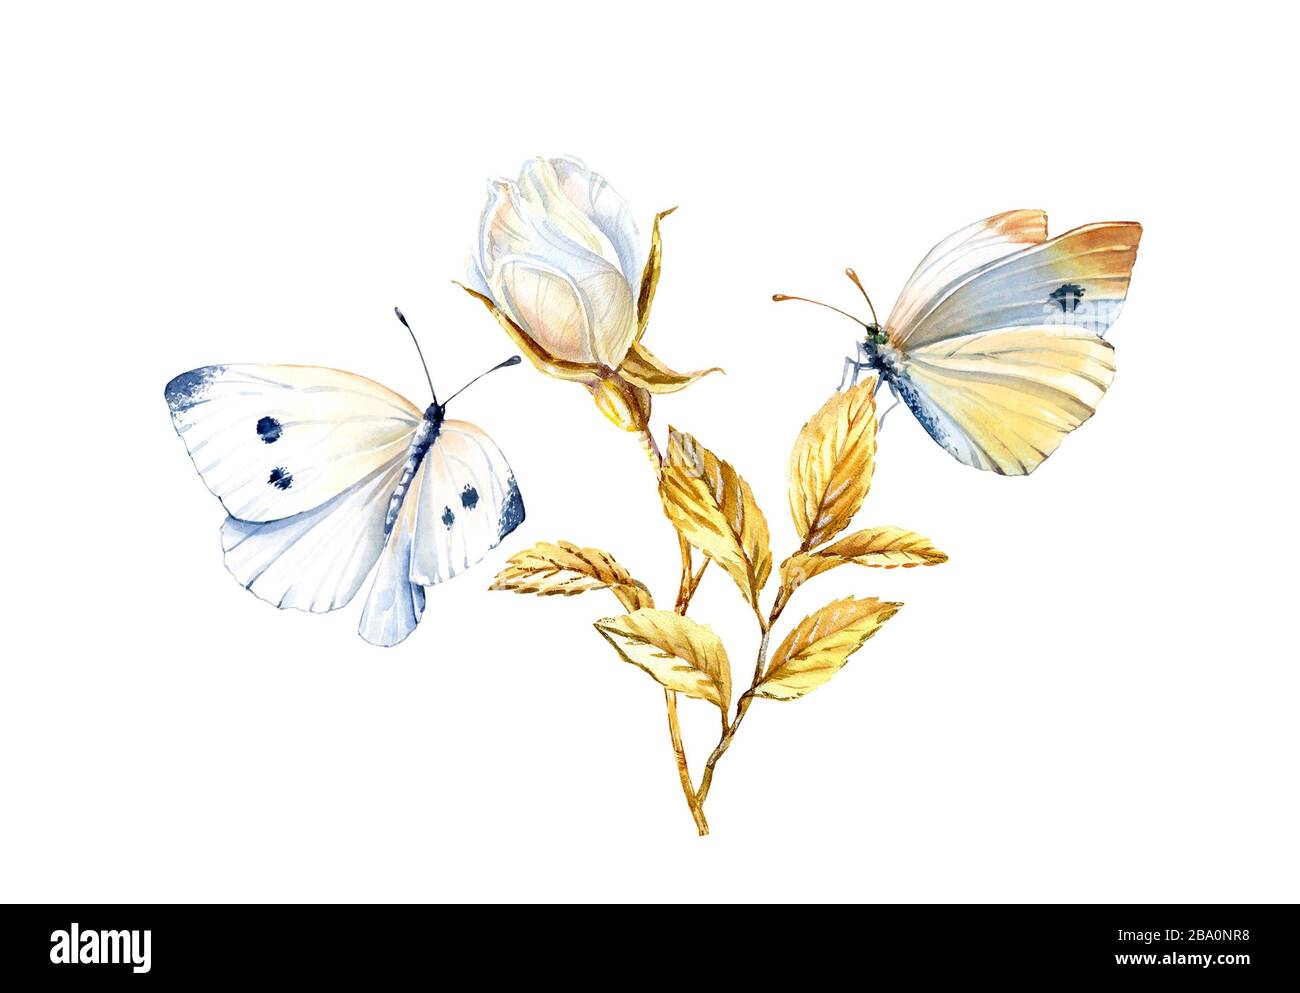 Watercolor rose with butterflies. Realistic branch with golden leaves isolated on white. Detailed white rose bud. Botanical floral illustration with Stock Photo